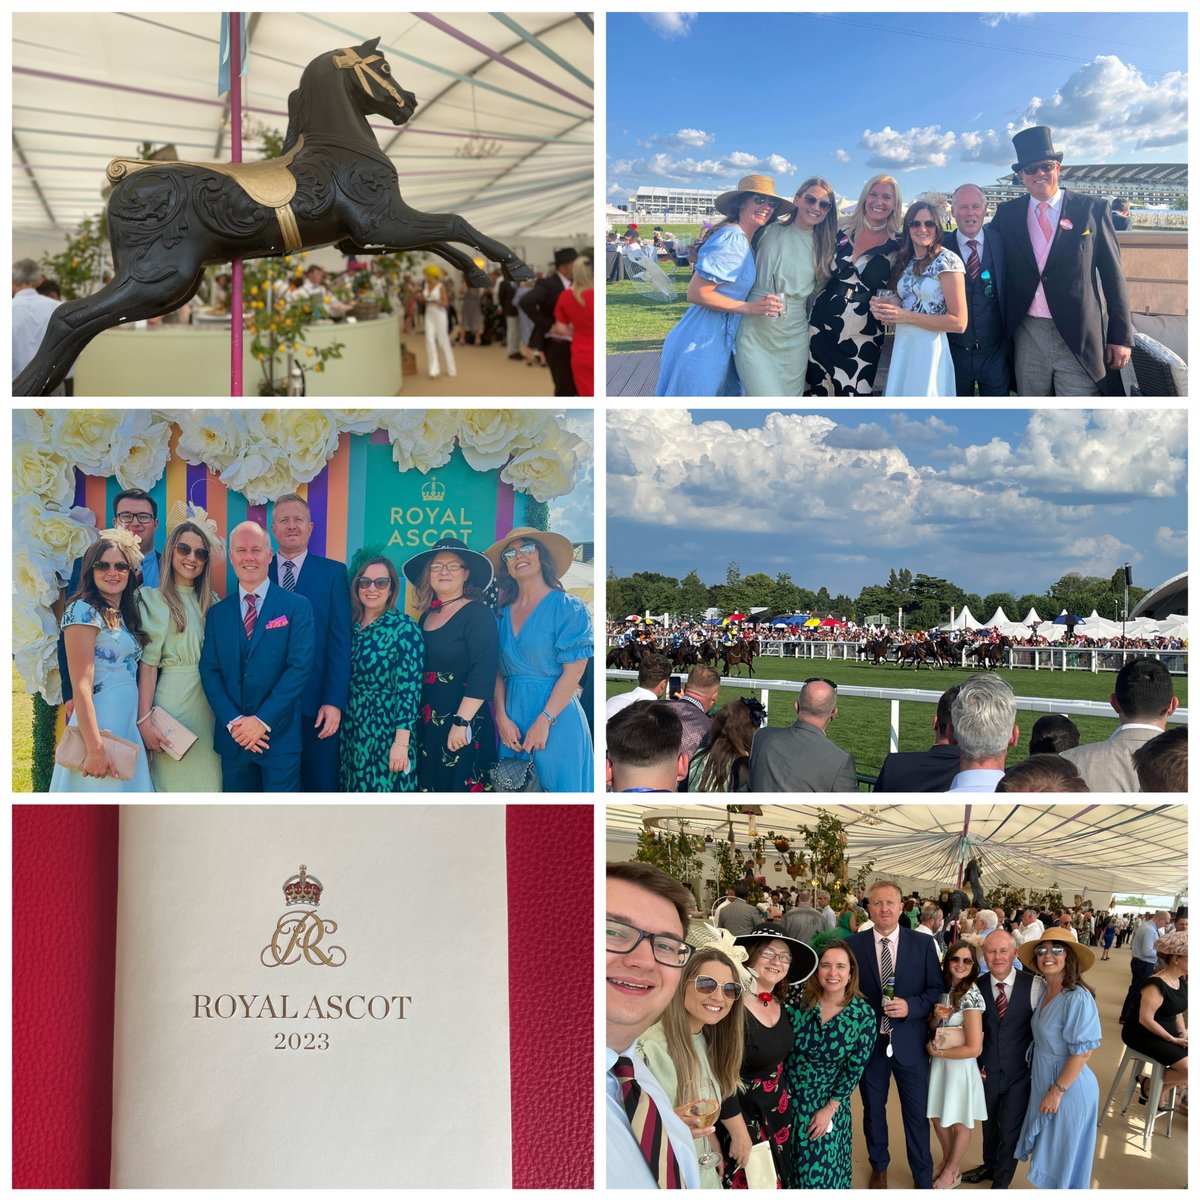 Some snapshots from a brilliant day’s #teambuilding at Royal Ascot yesterday. In the glorious sunshine, we chatted, danced, drank, ate, made a legitimate stage debut(!) & of course, had several flutters with very successful results!
#royalascot #ladiesday #horseracing #teamWM